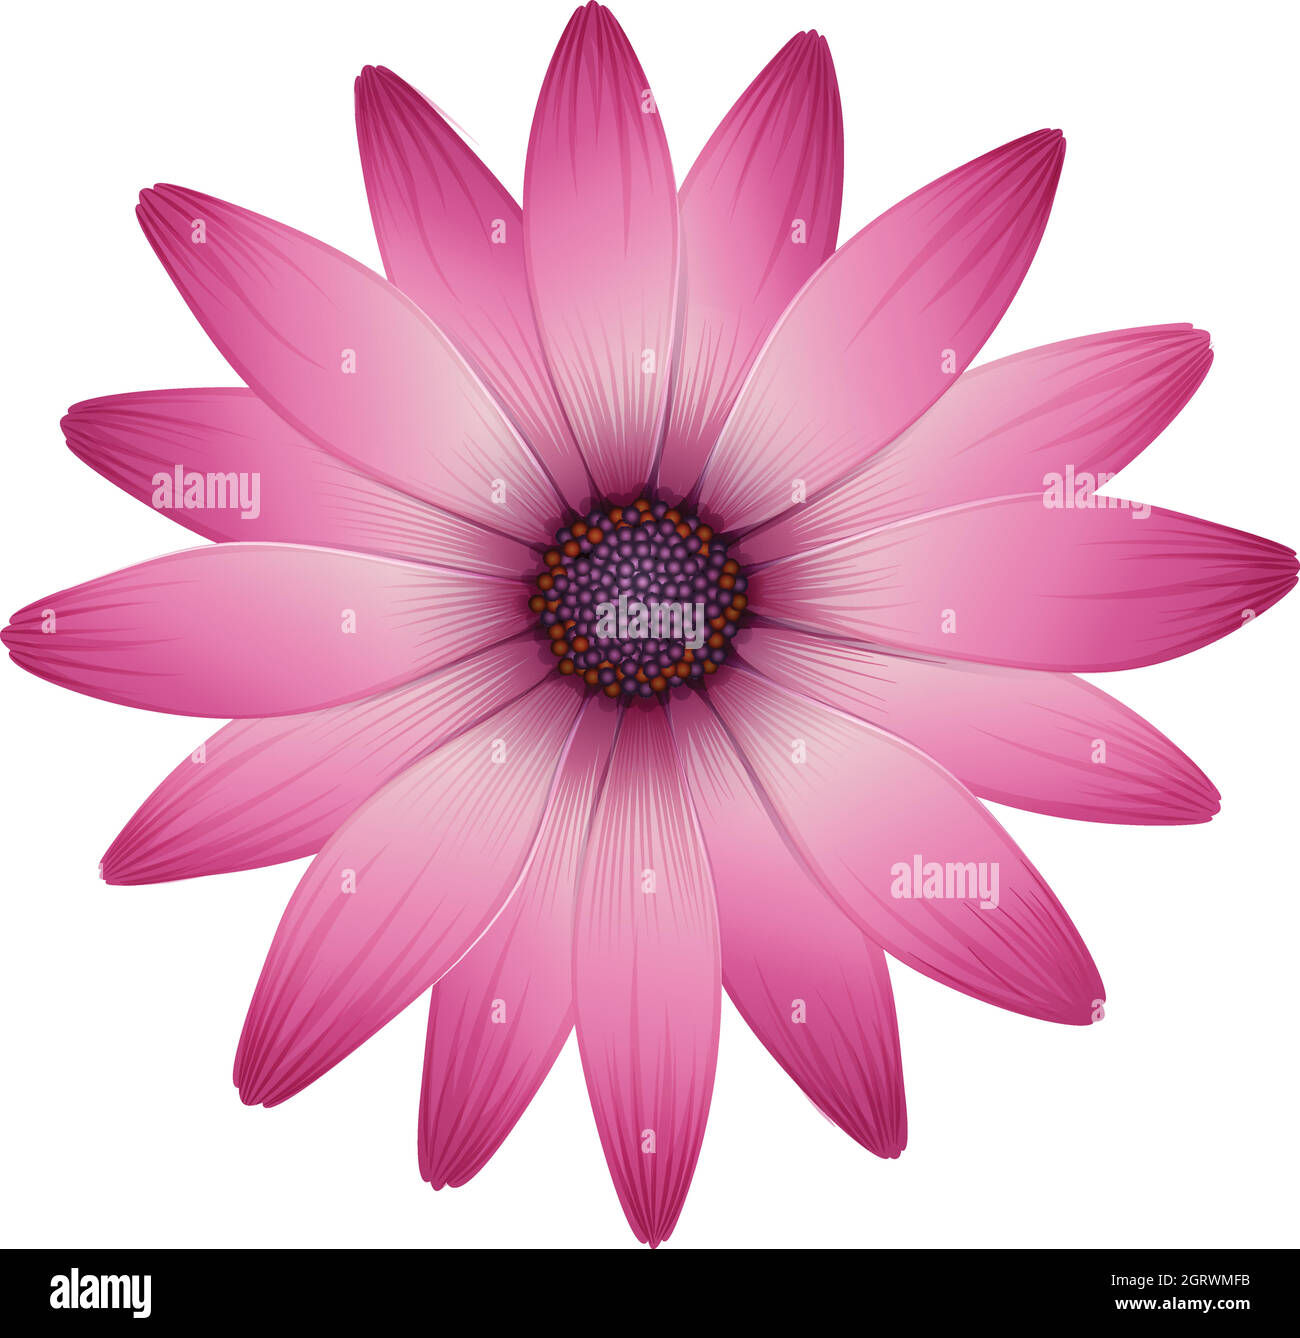 A flower with pink petals Stock Vector